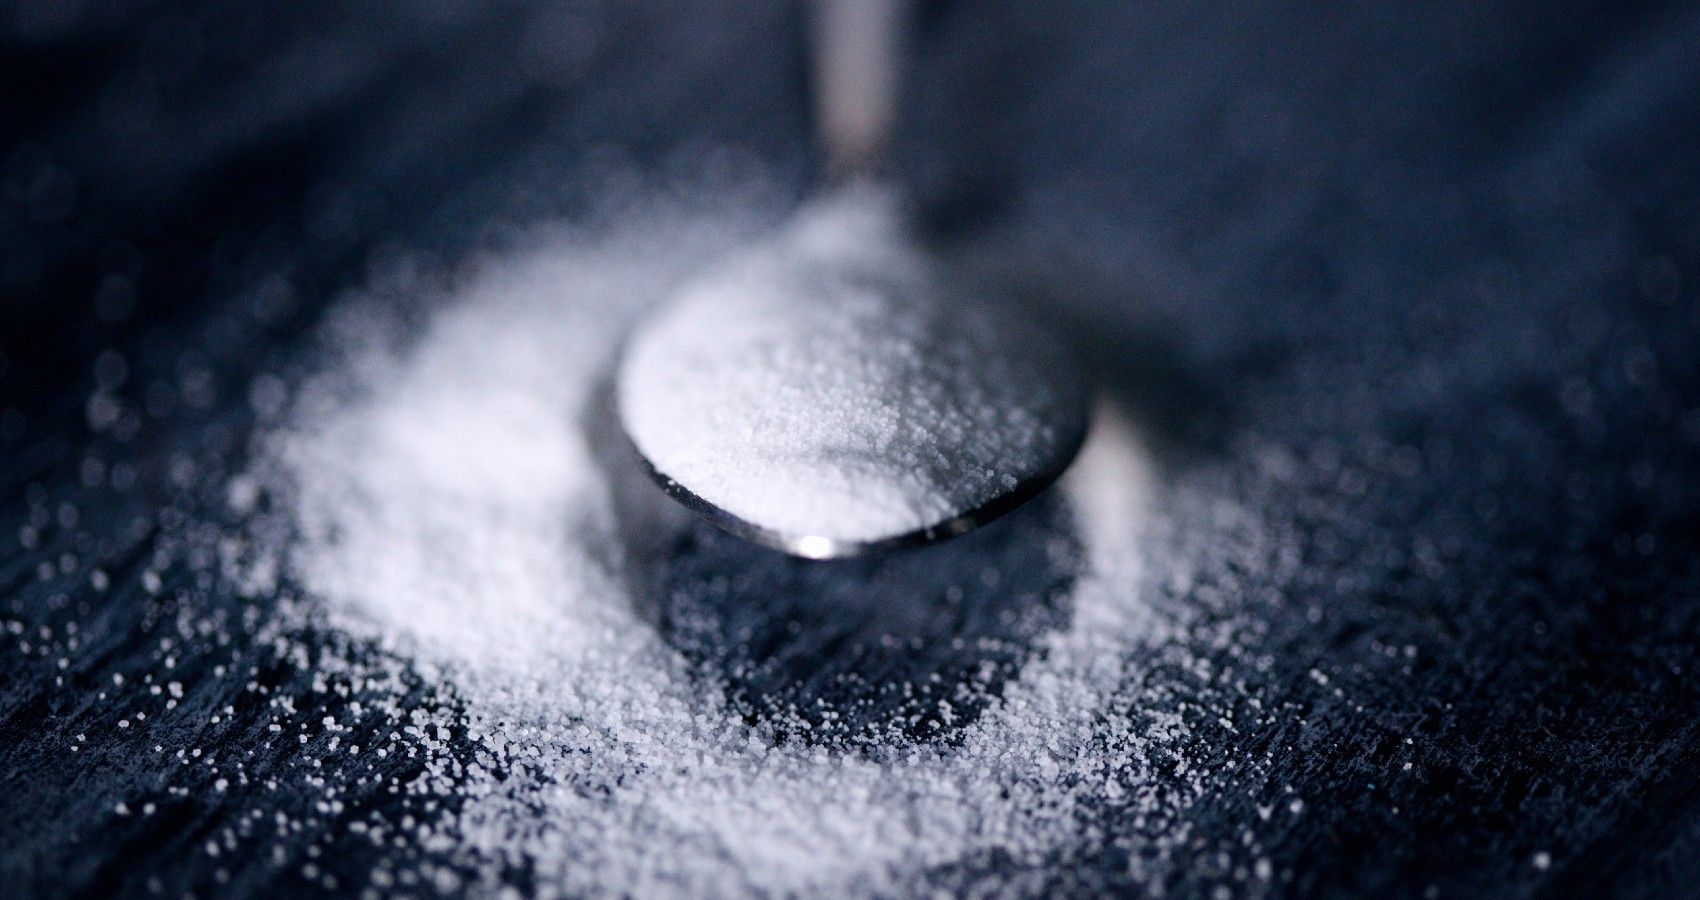 A spoon with sugar on it on a table